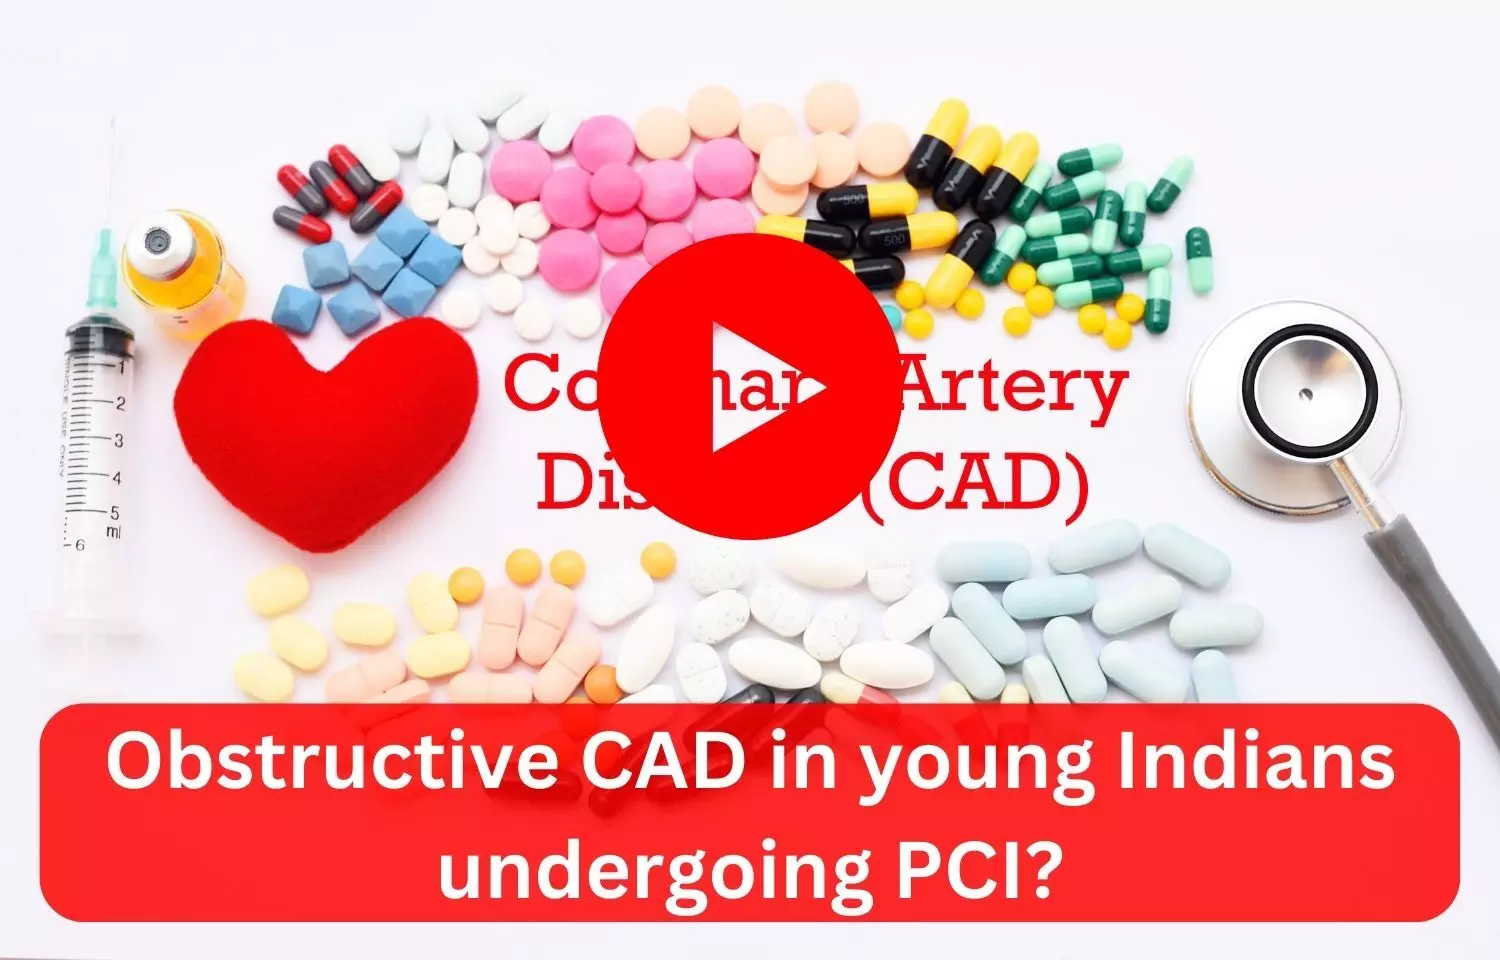 Obstructive CAD in young Indians undergoing PCI?